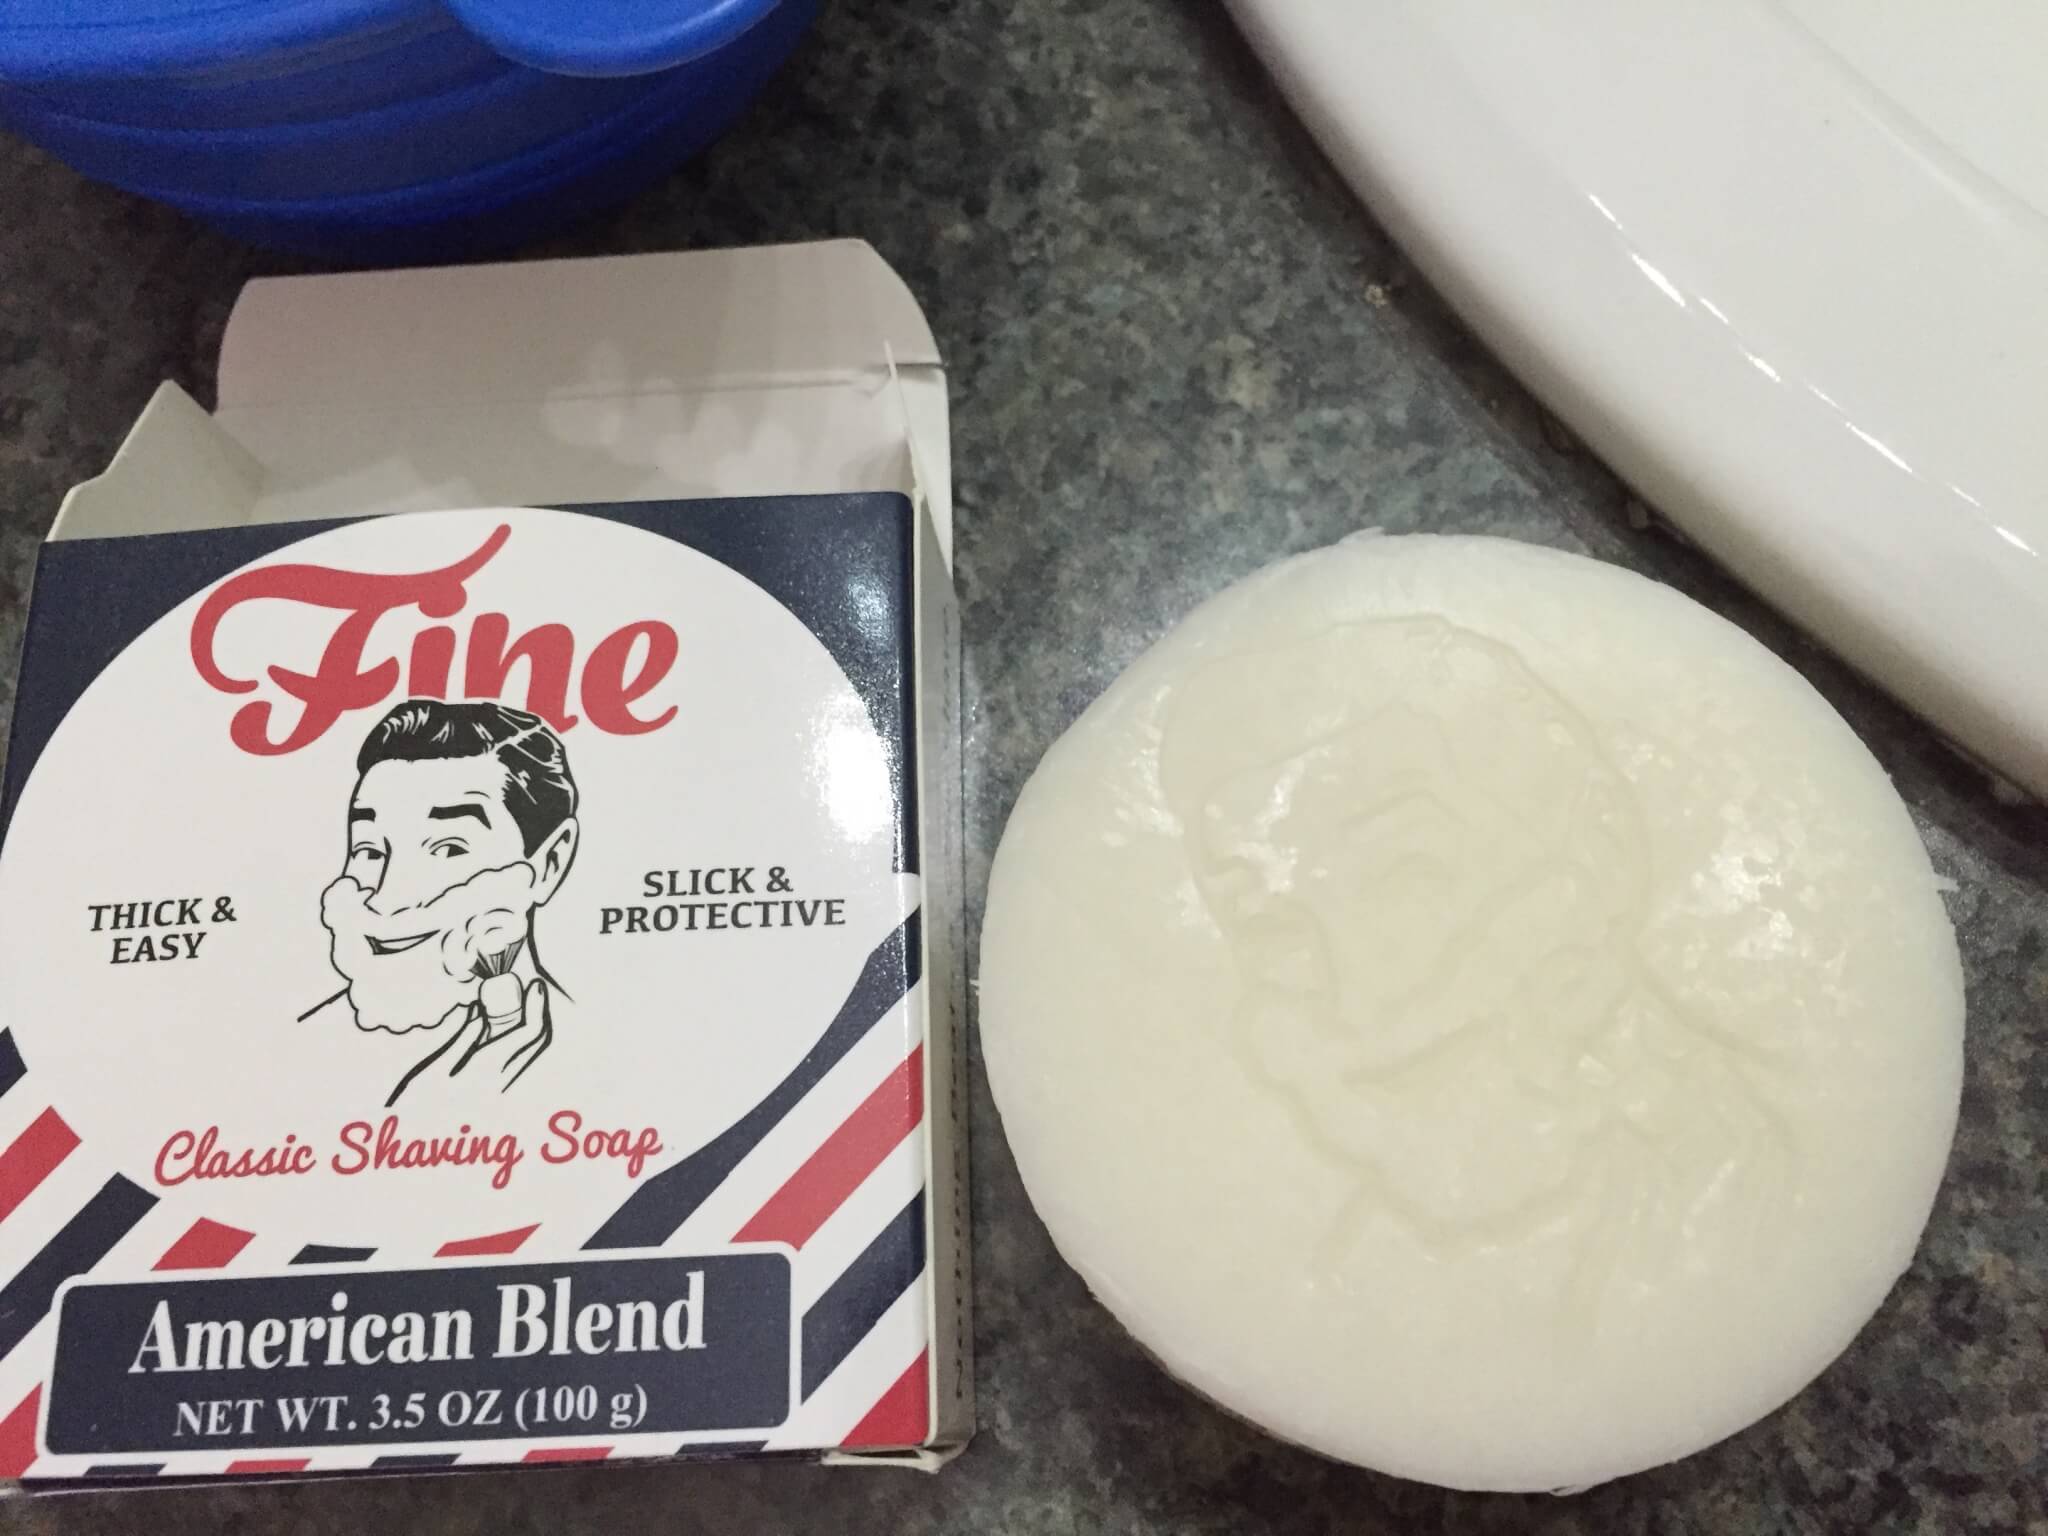 Fine Accoutrements Aftershave, American Blend - REC